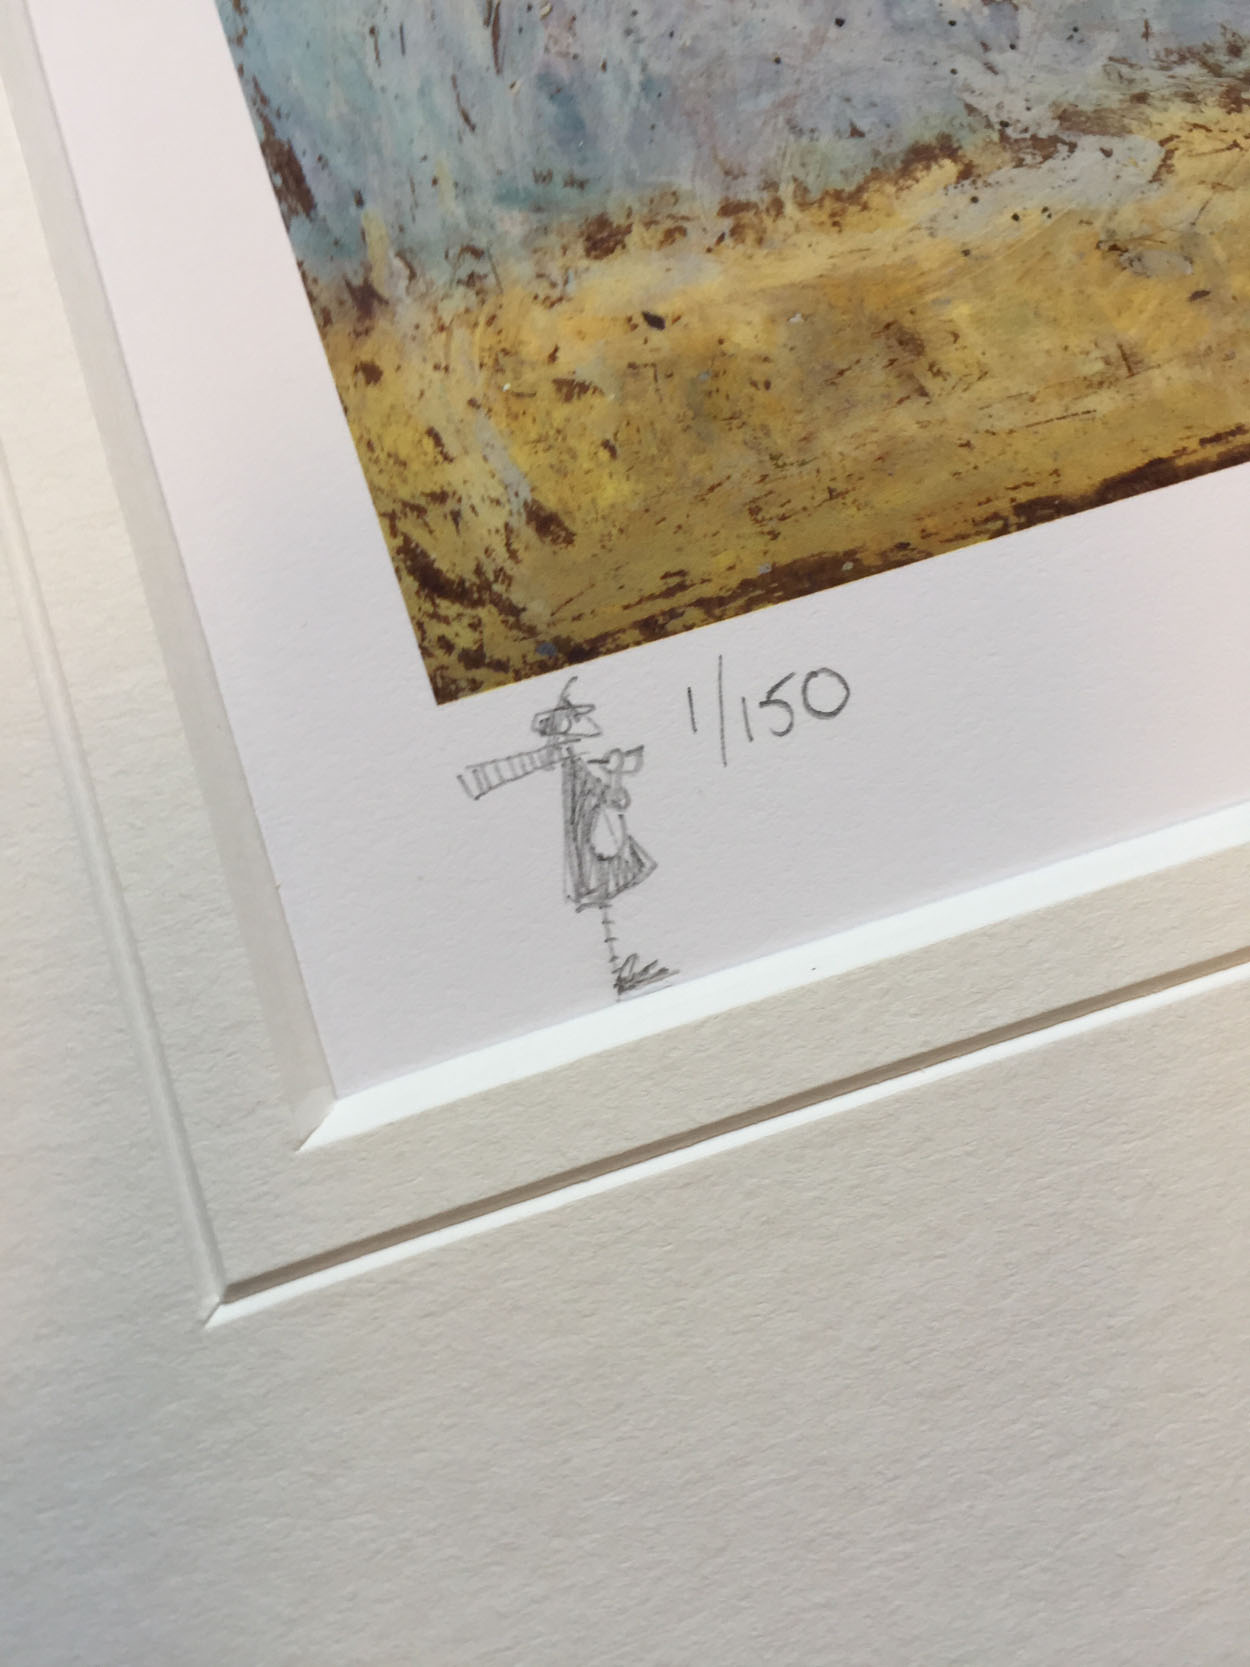 Nice View That (Remarque) (1/150) by Sam Toft